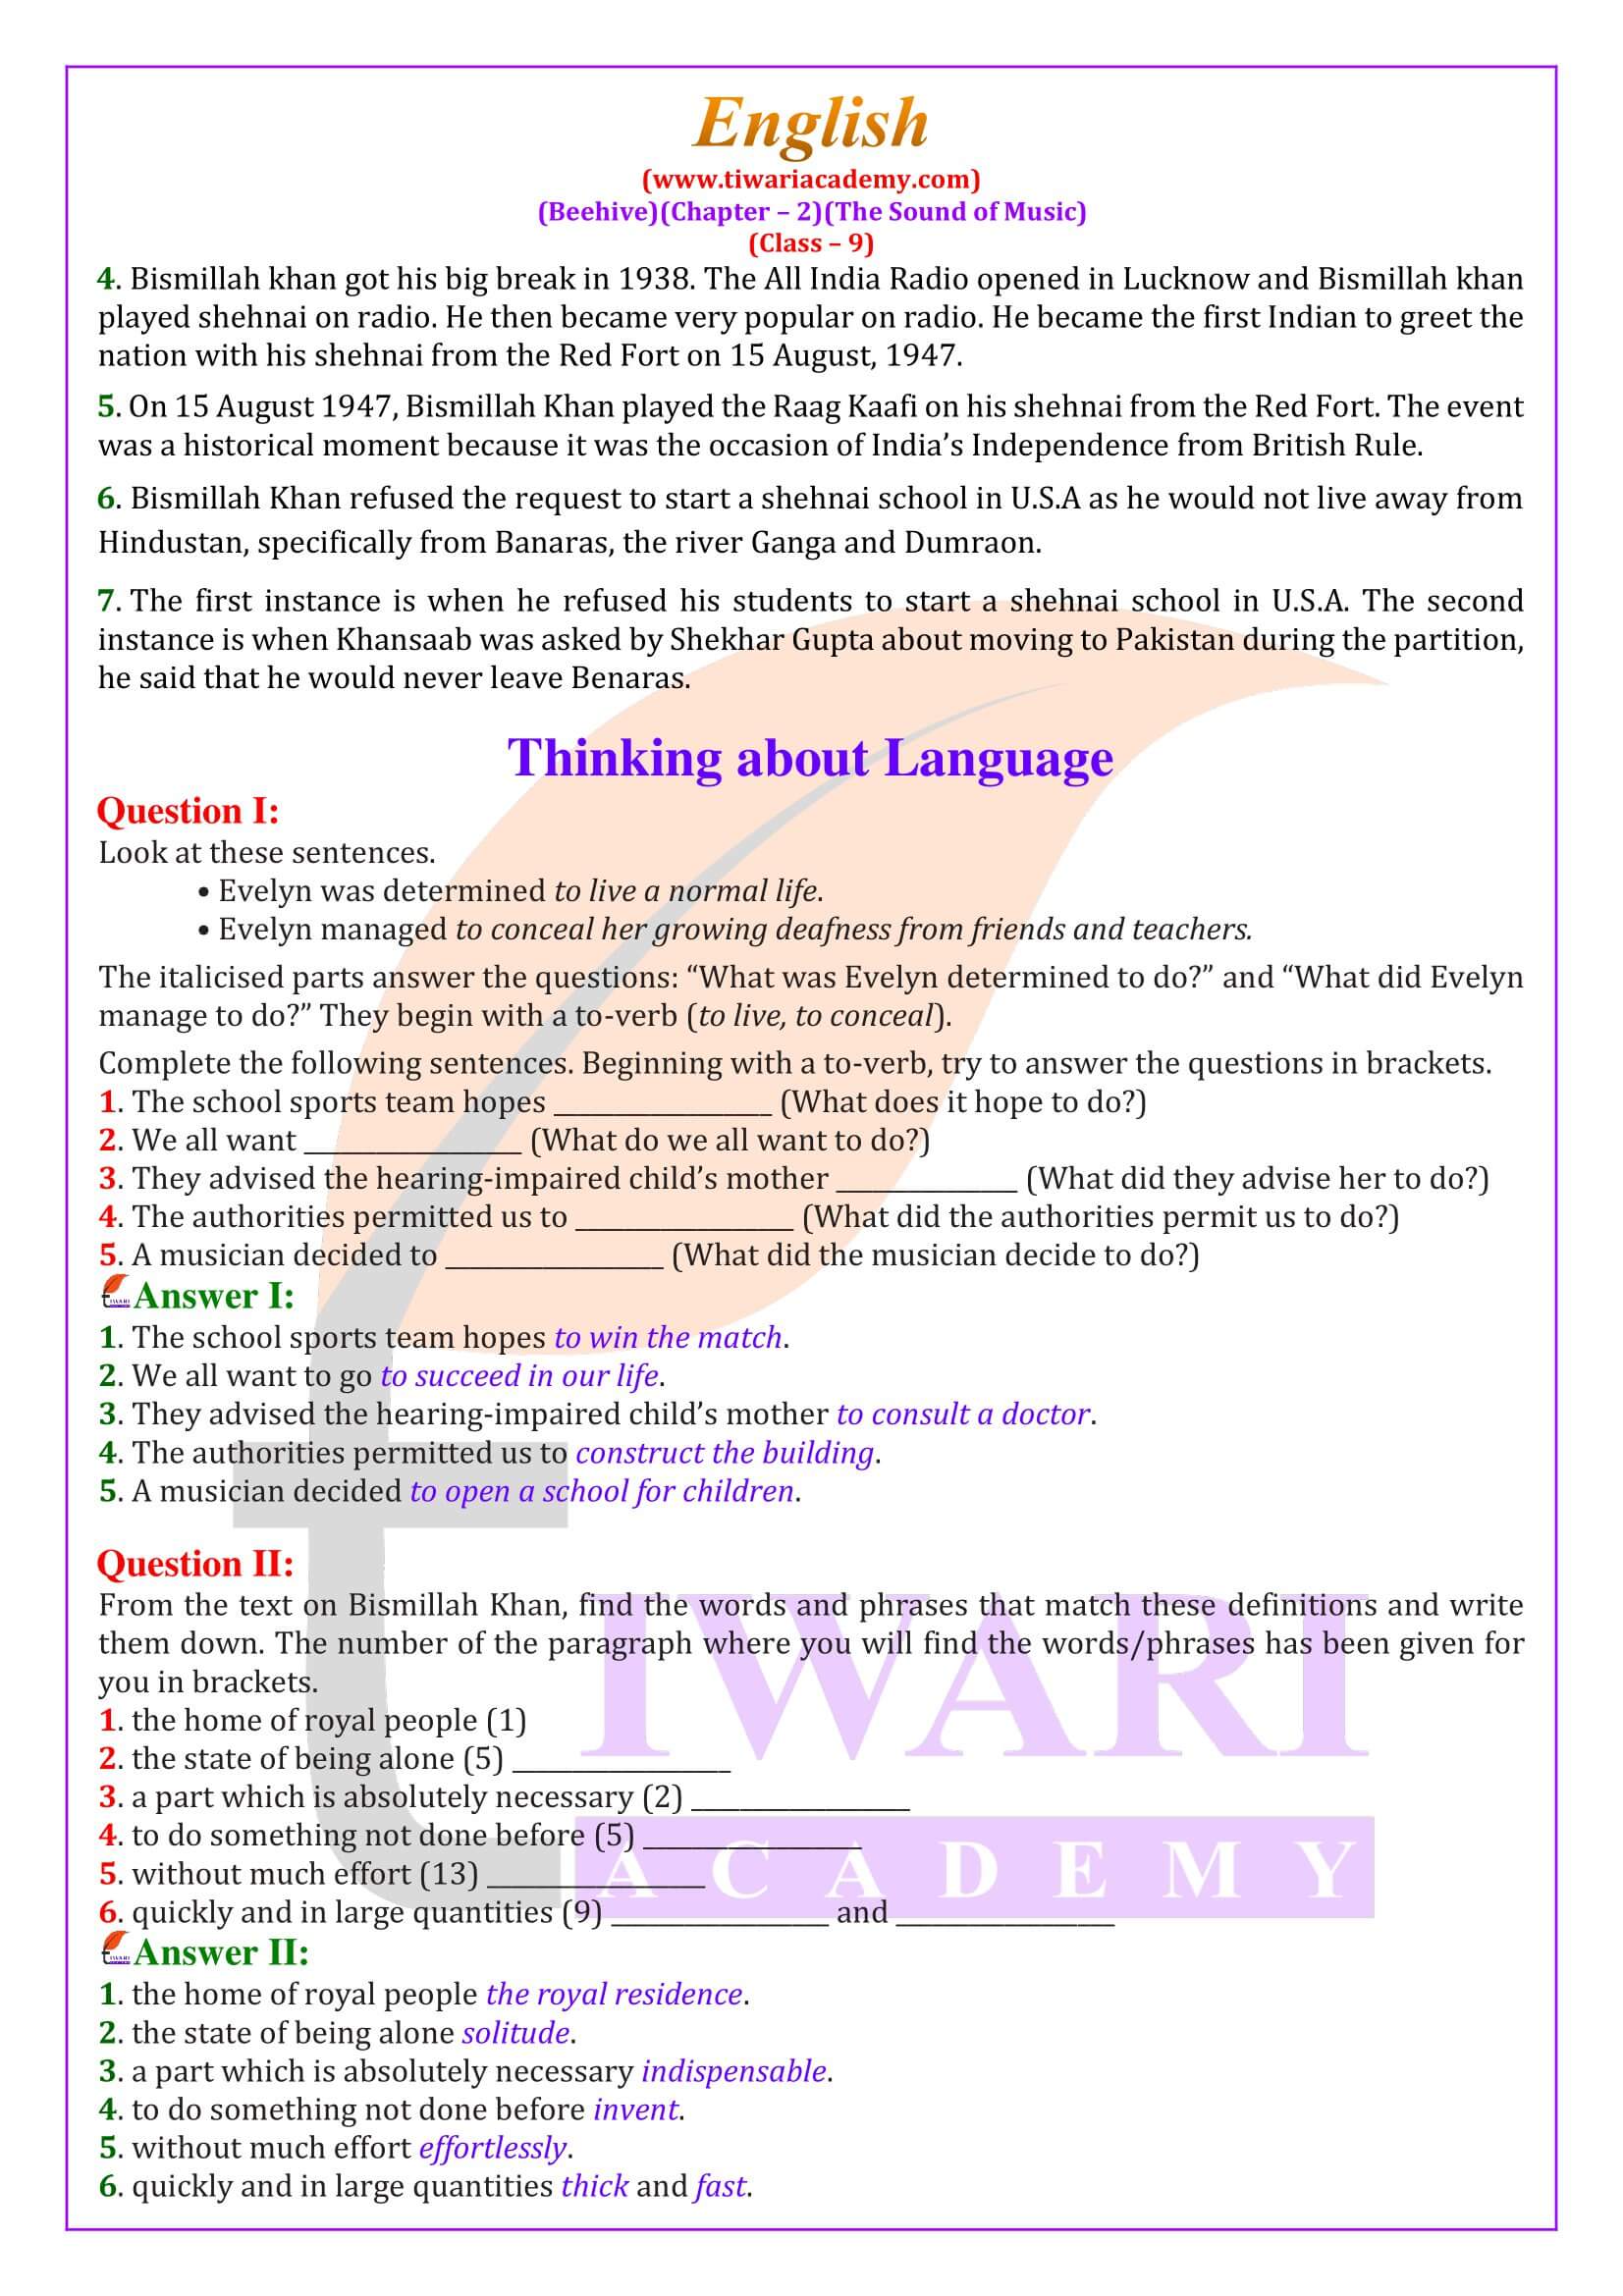 NCERT Solutions Class 9 English Beehive Chapter 2 The Sound of Music